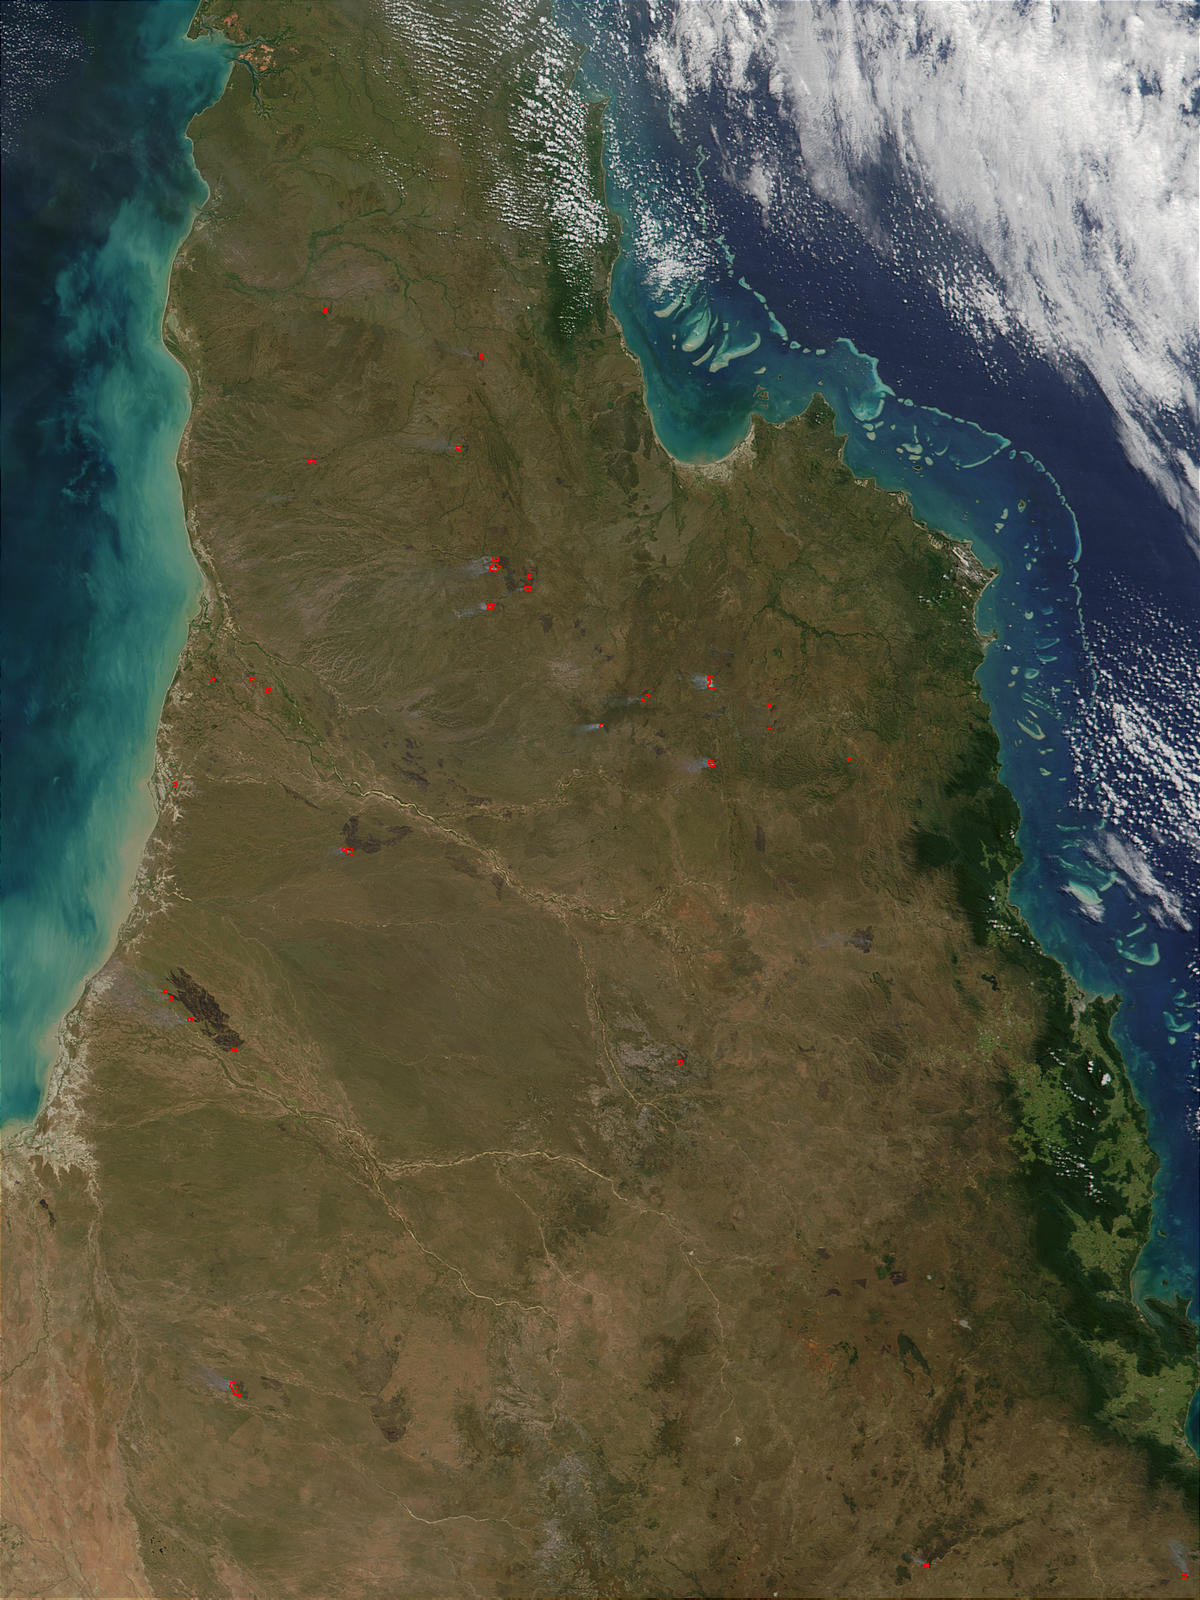 Fires in Cape York Peninsula, Queensland, Australia - related image preview